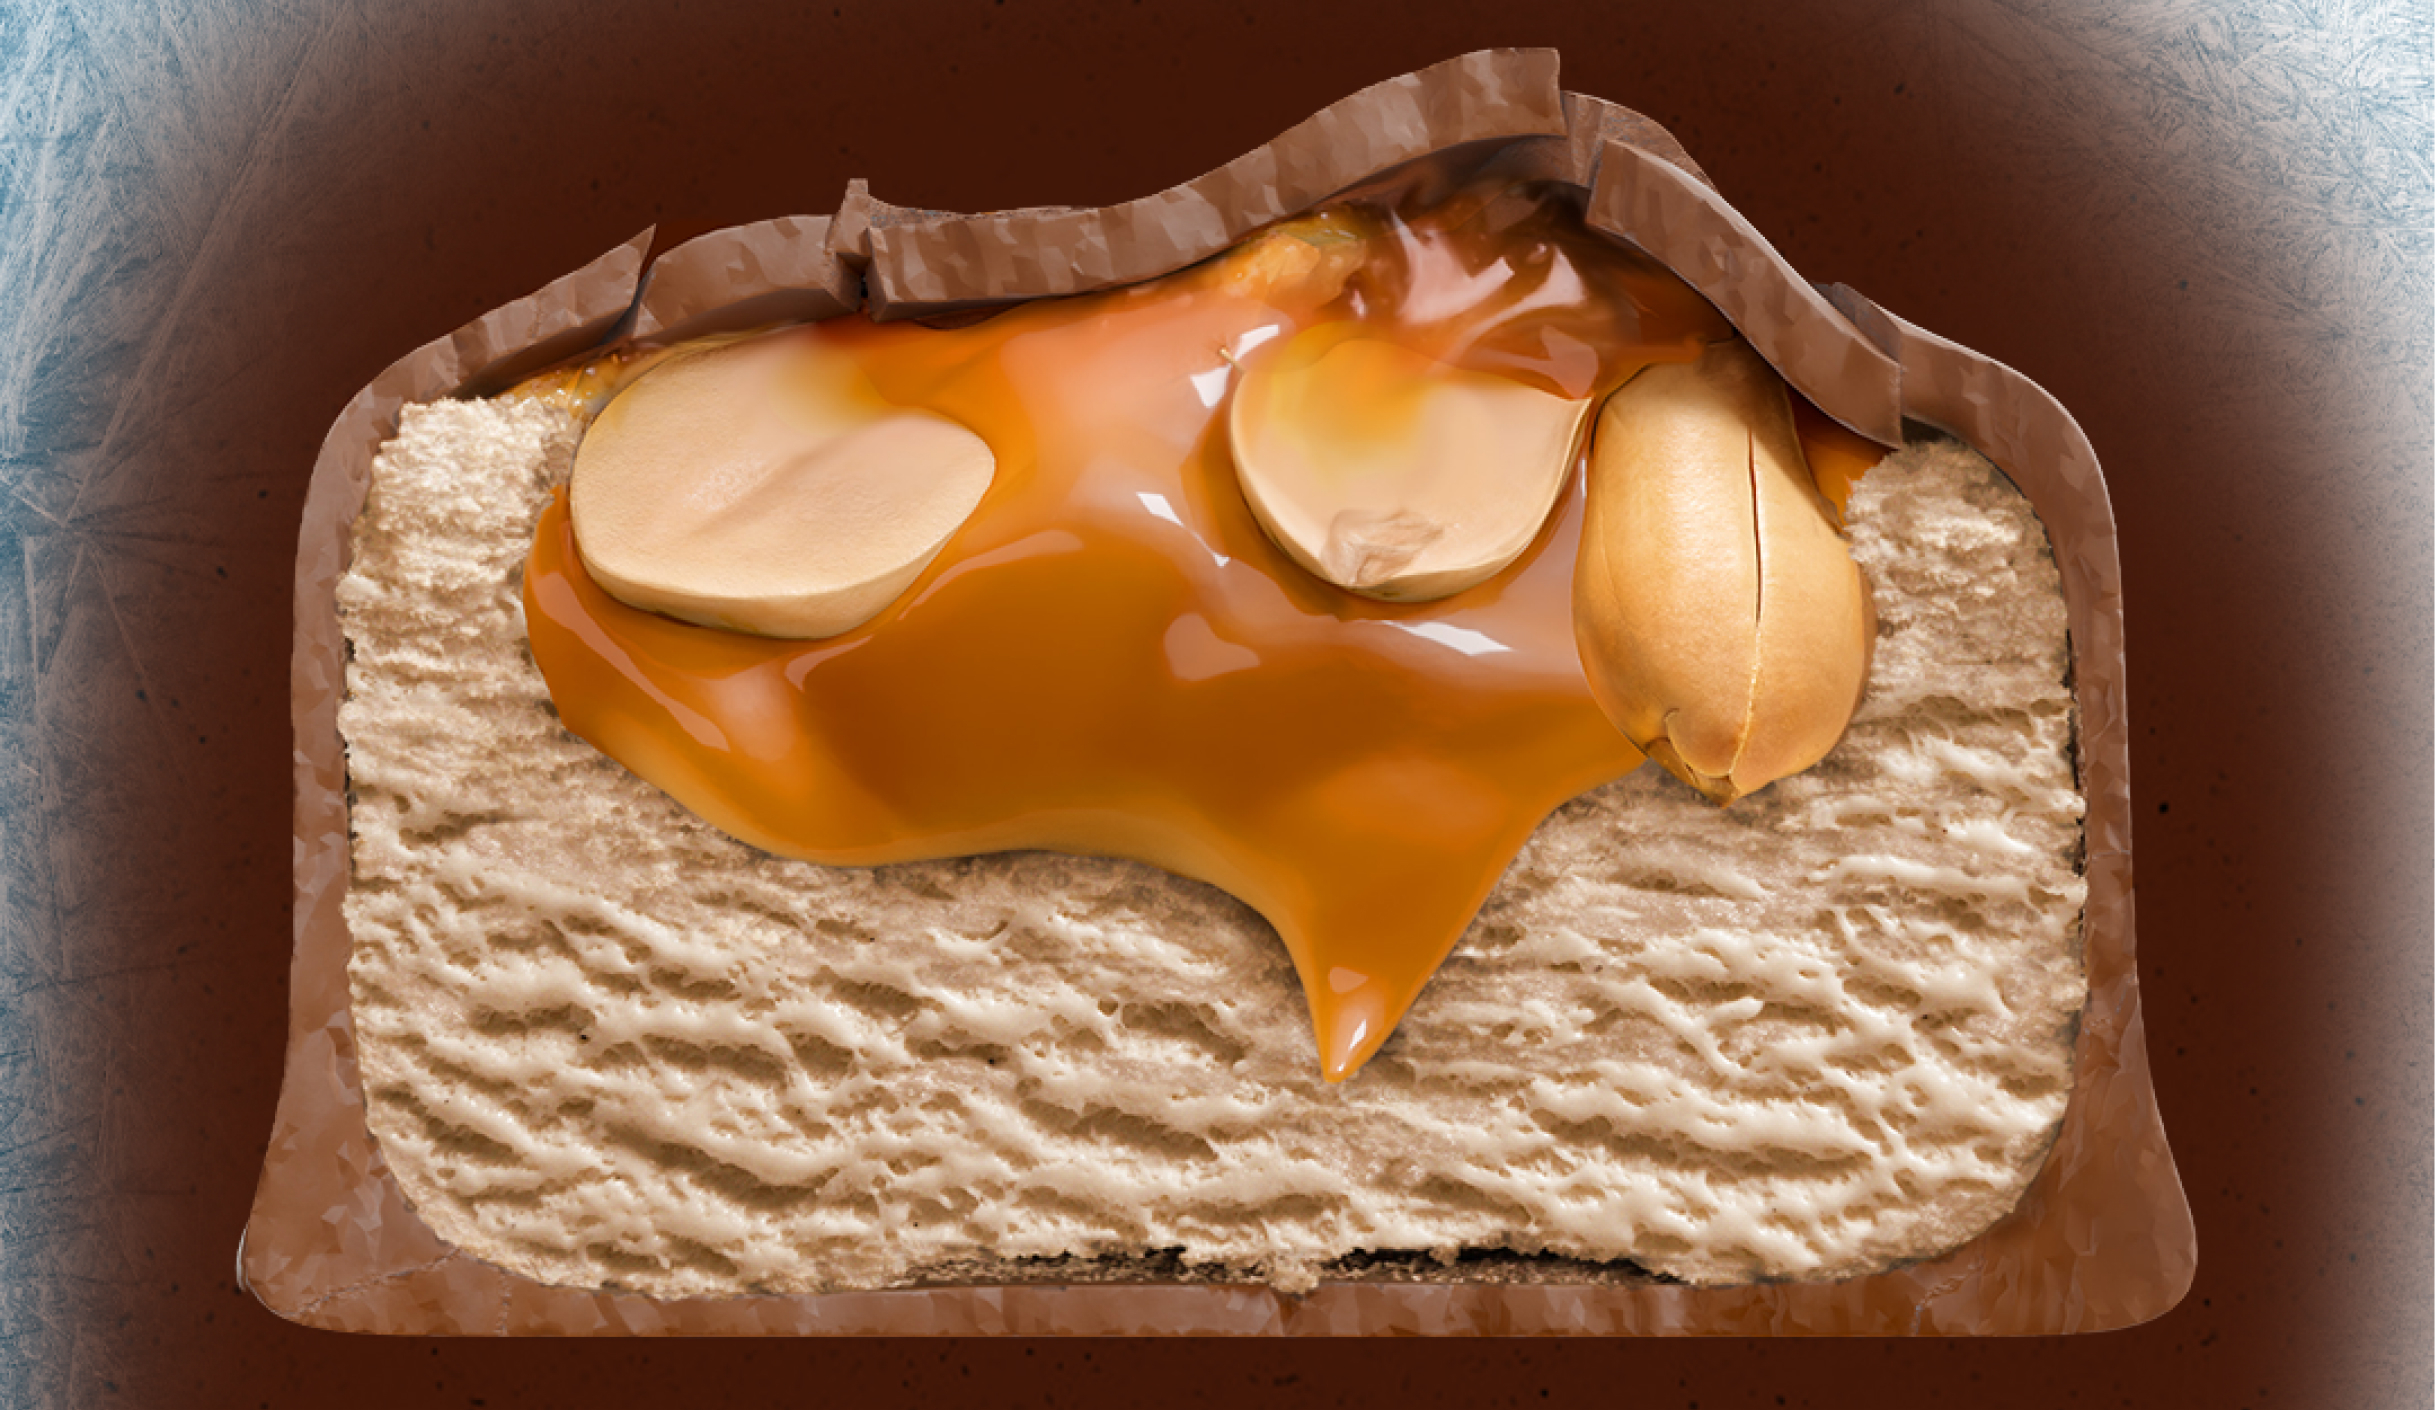 Cross-section view of Snickers icecream bar